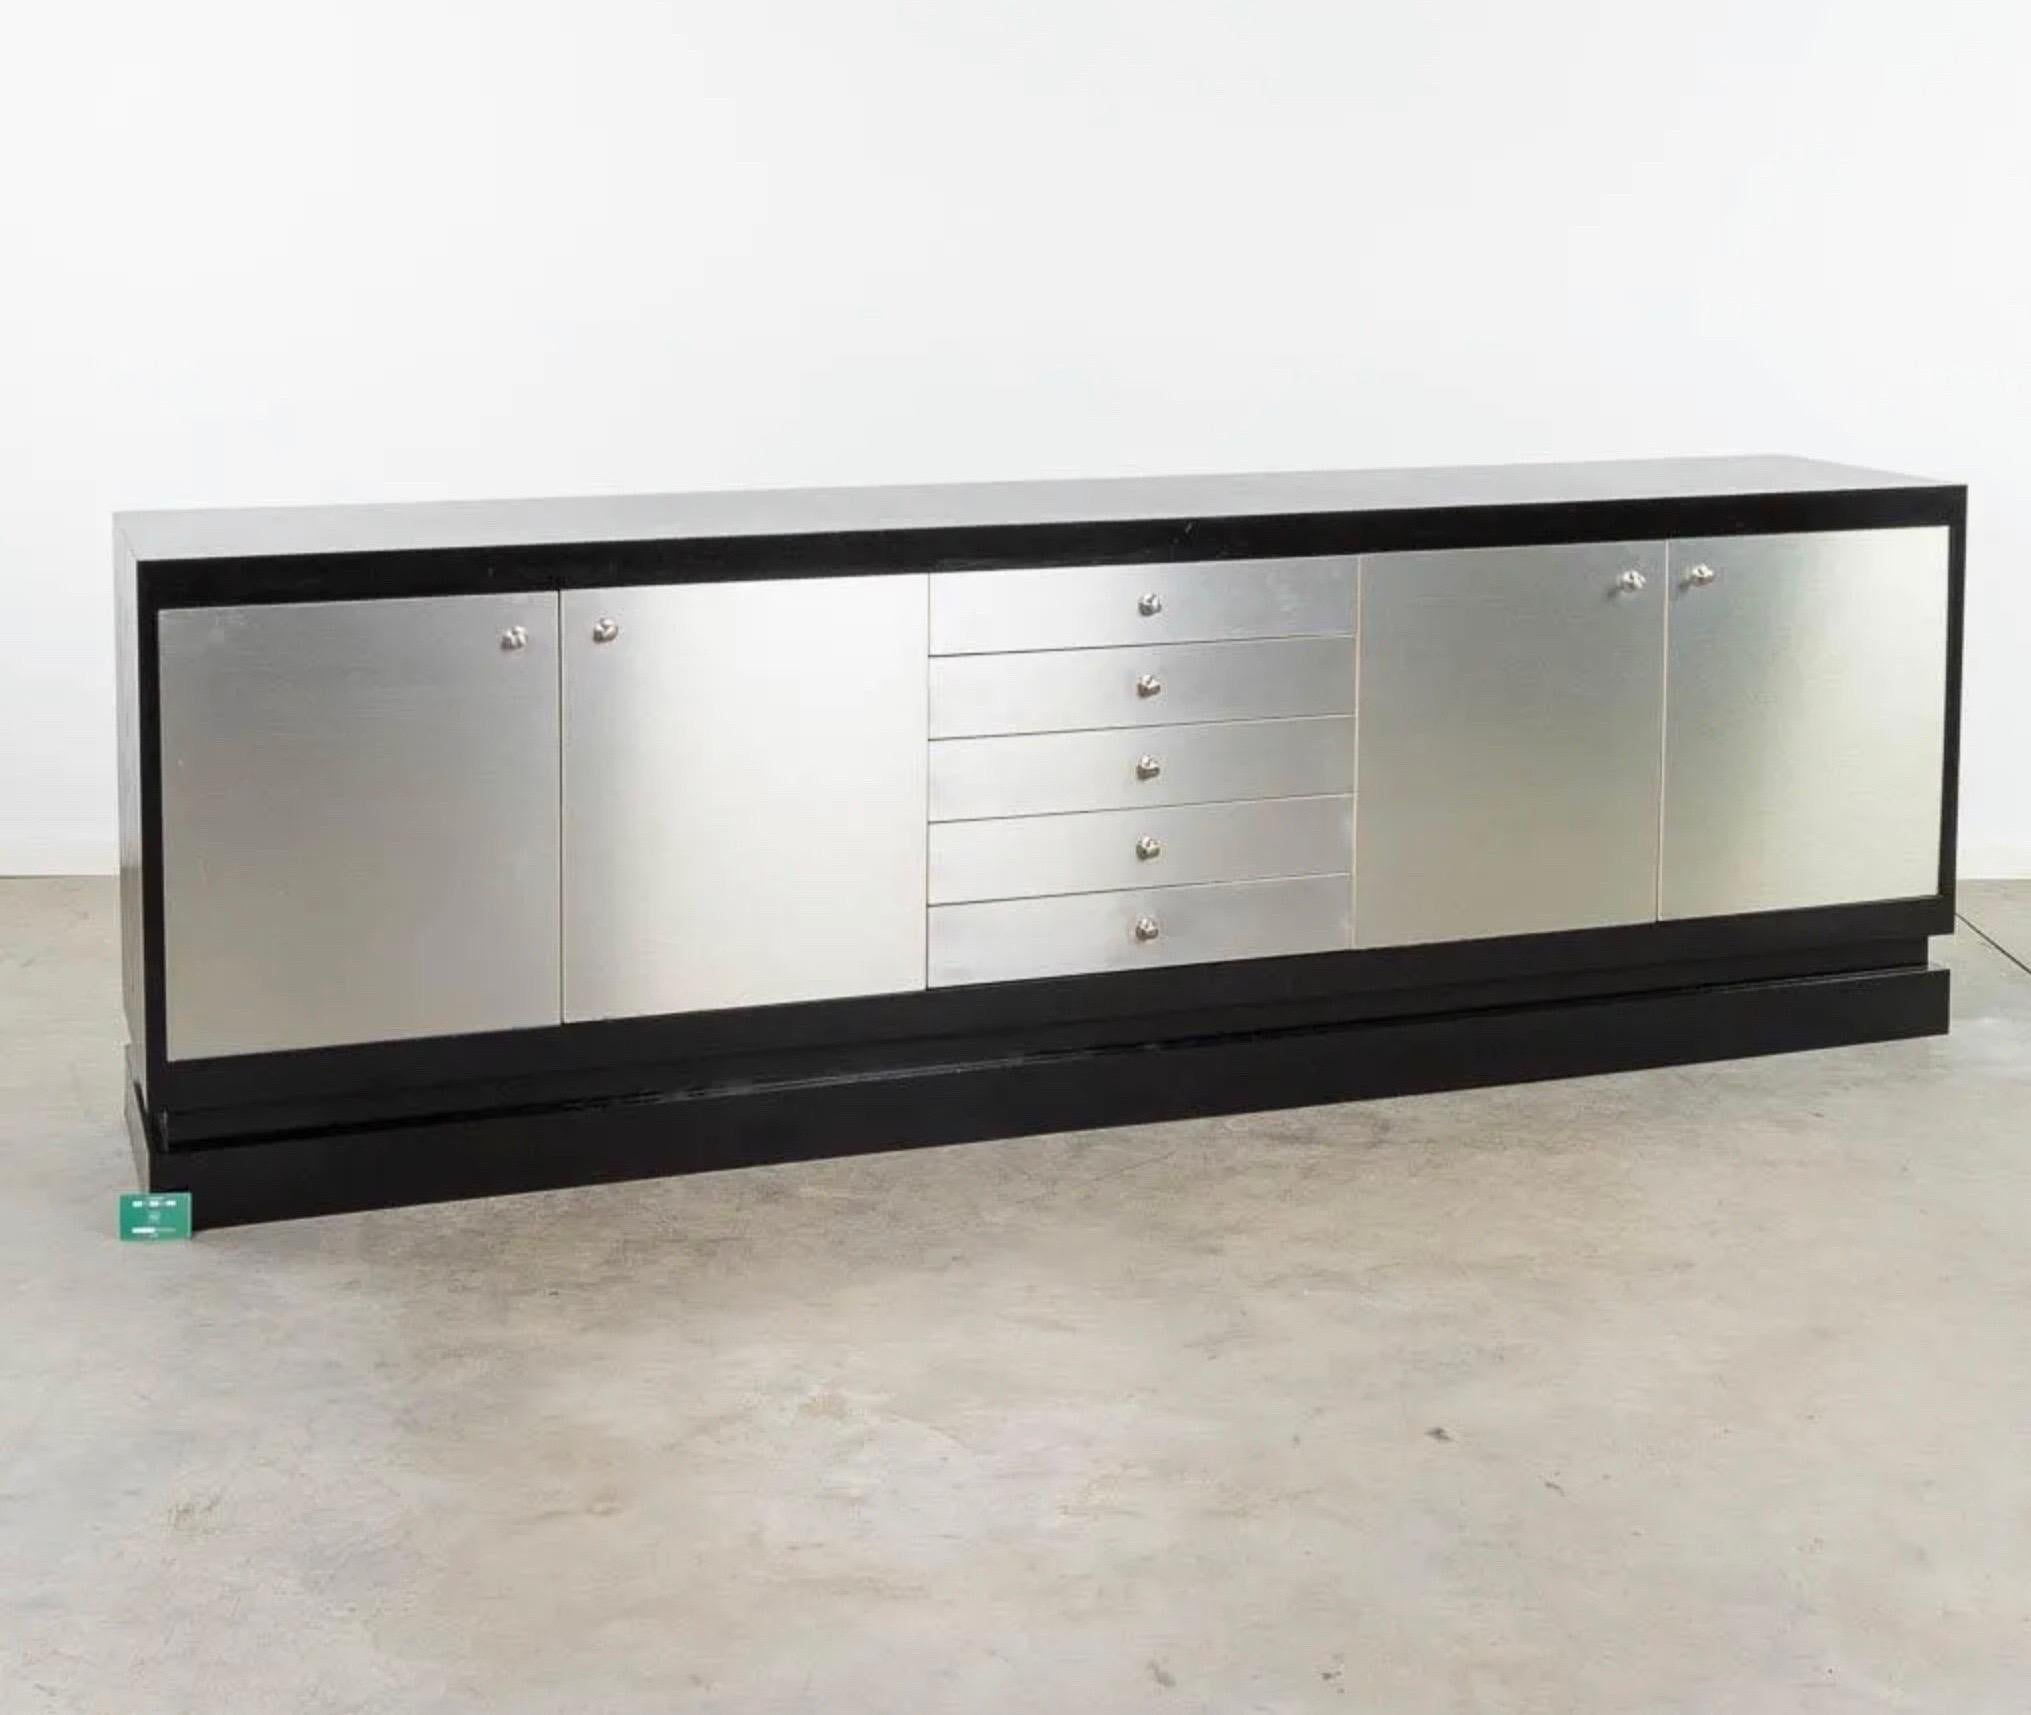 Rare De Coene ebonized and aluminum sideboard.
XL size , four doors and five drawers.
Exceptional quality, beautifully made and in great condition.